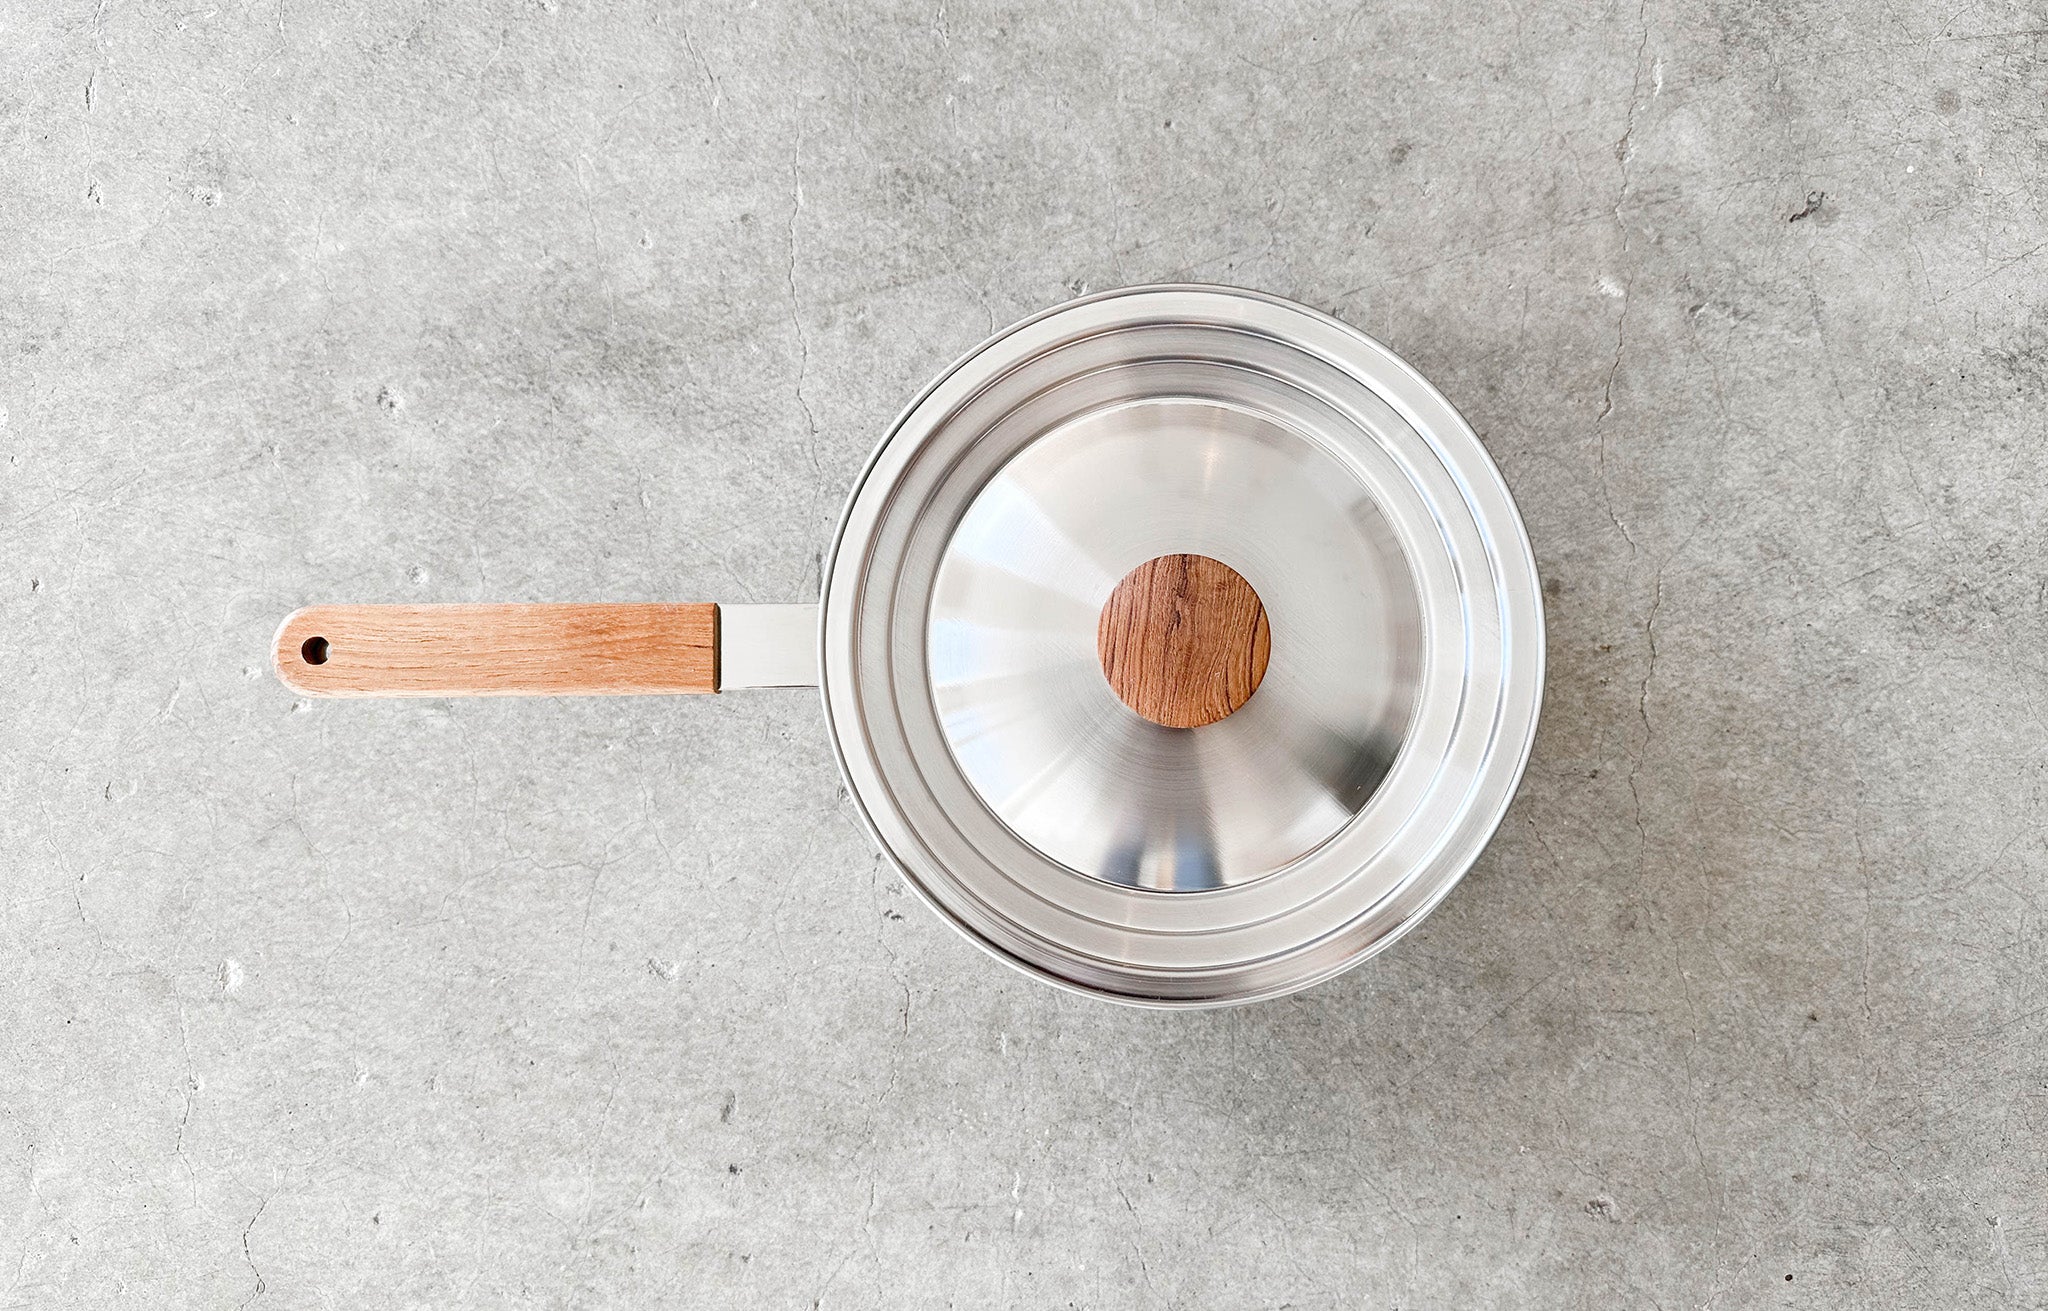 Stainless Steel Pot with Wood Handle view from above | lifestyle